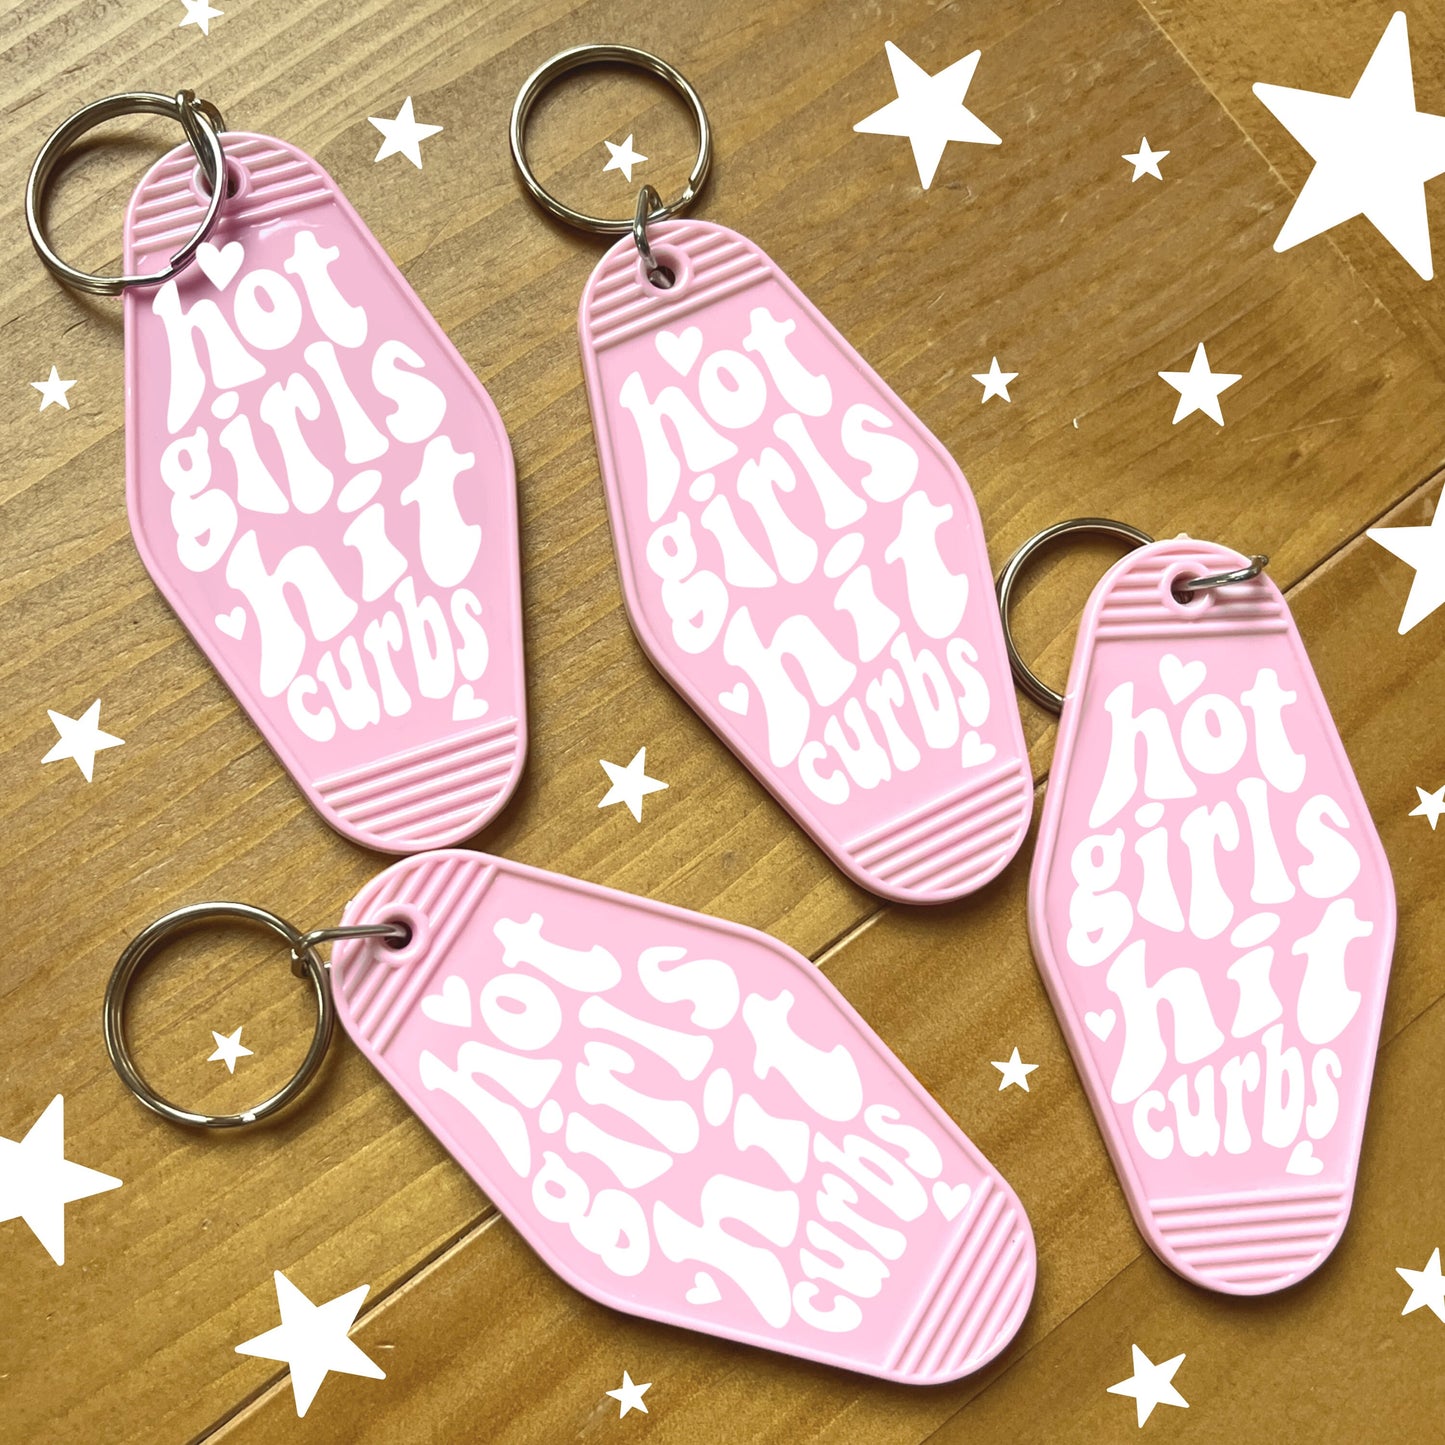 Hot Girls Hit Curbs Keychain | Pink Motel Style Keychains, Passed Driving Test, Driving Test Gift, First Car Gift, Car Gift